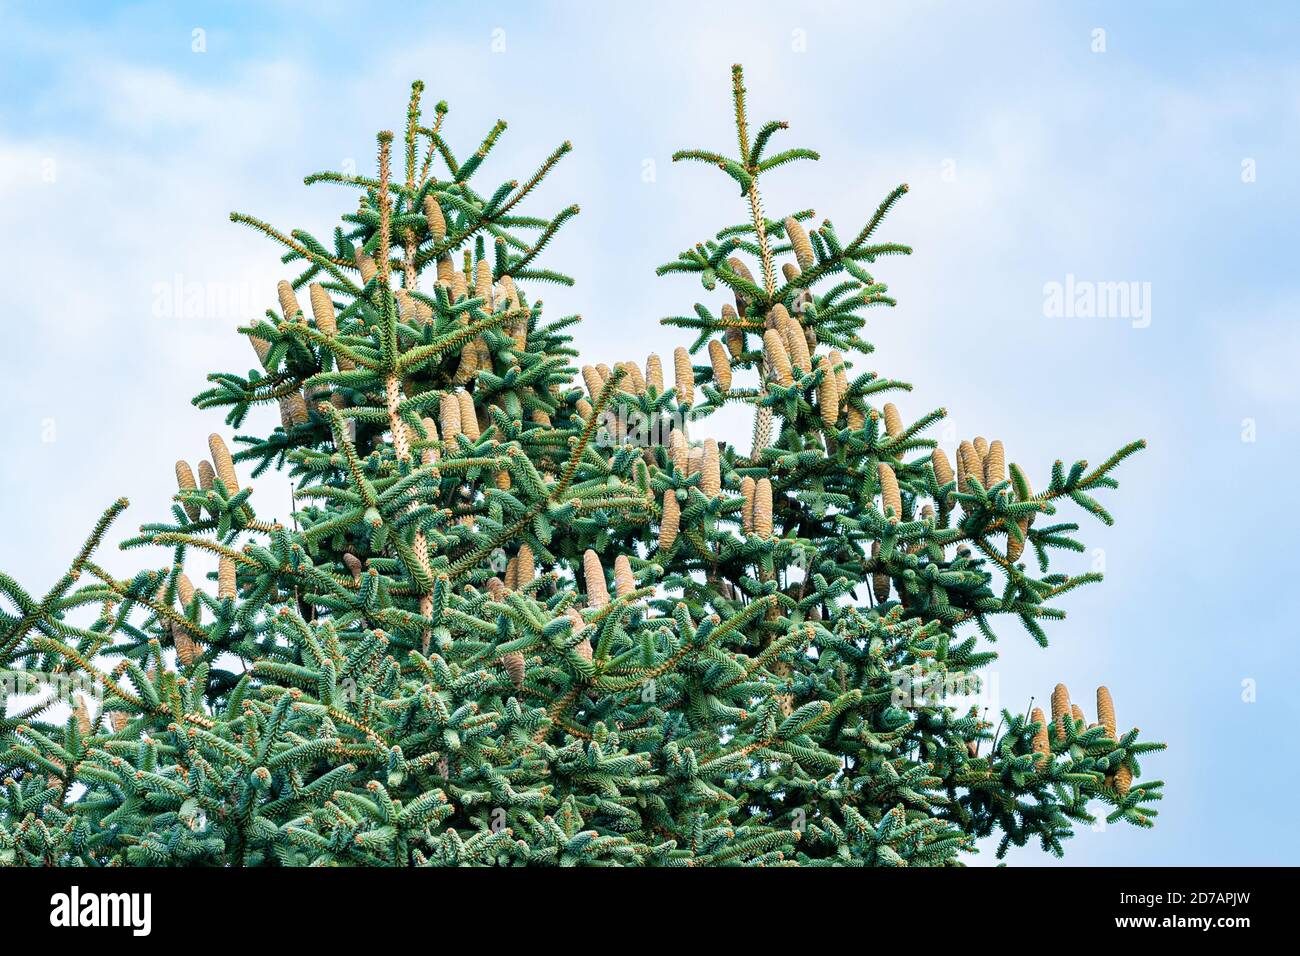 Mature cones of Abies pinsapo (spanish fir), native to the spanish region of Andalusia Stock Photo